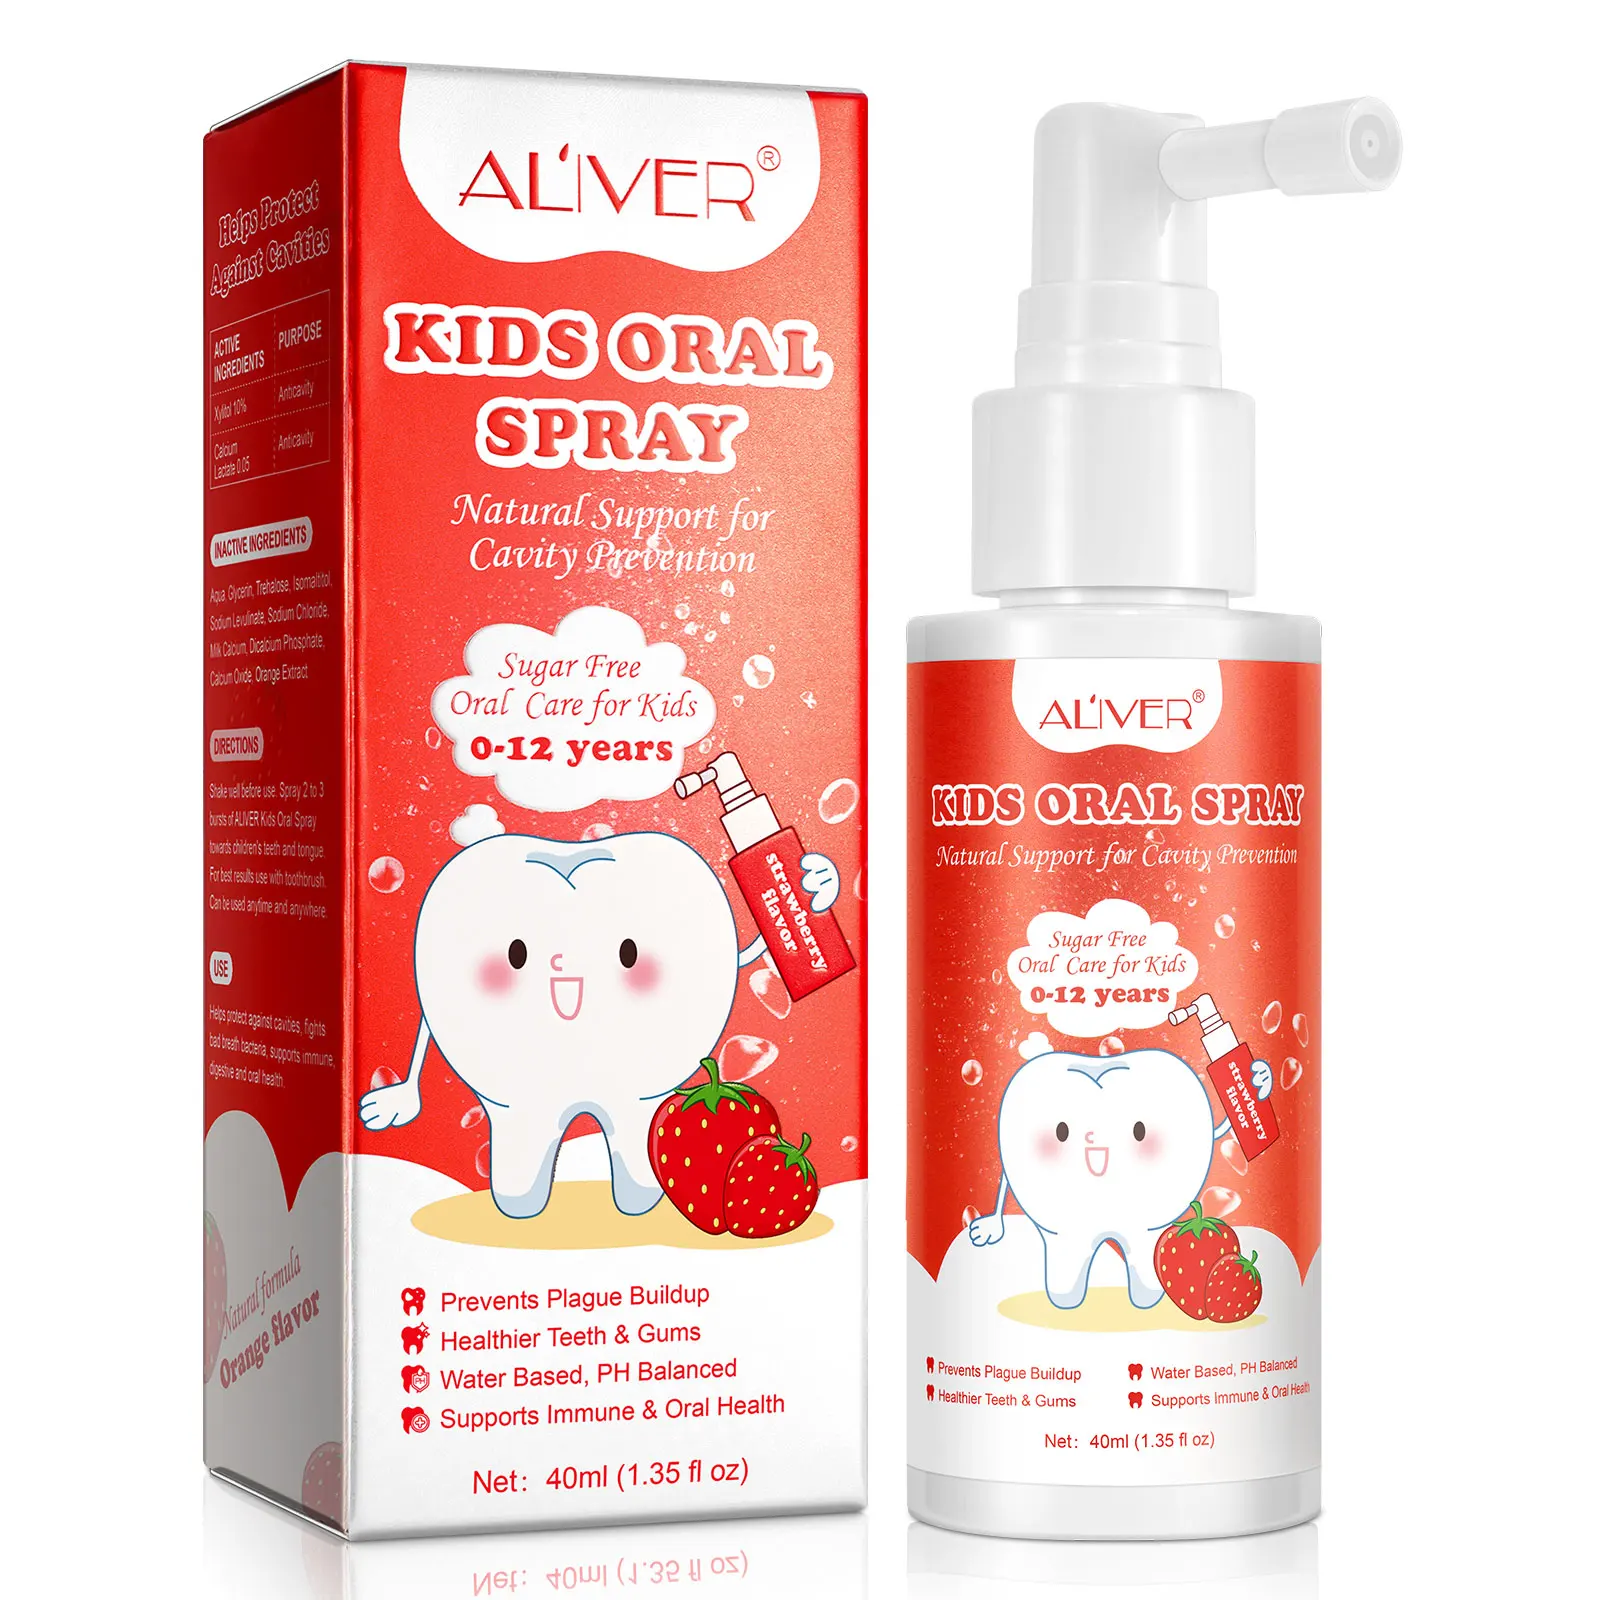 

ALIVER Sugar Free Oral Care Anti Bad Breath Remove Mouth Odor Kids Cavity Prevention Oral Refreshing Spray for Kids 0-12 Years